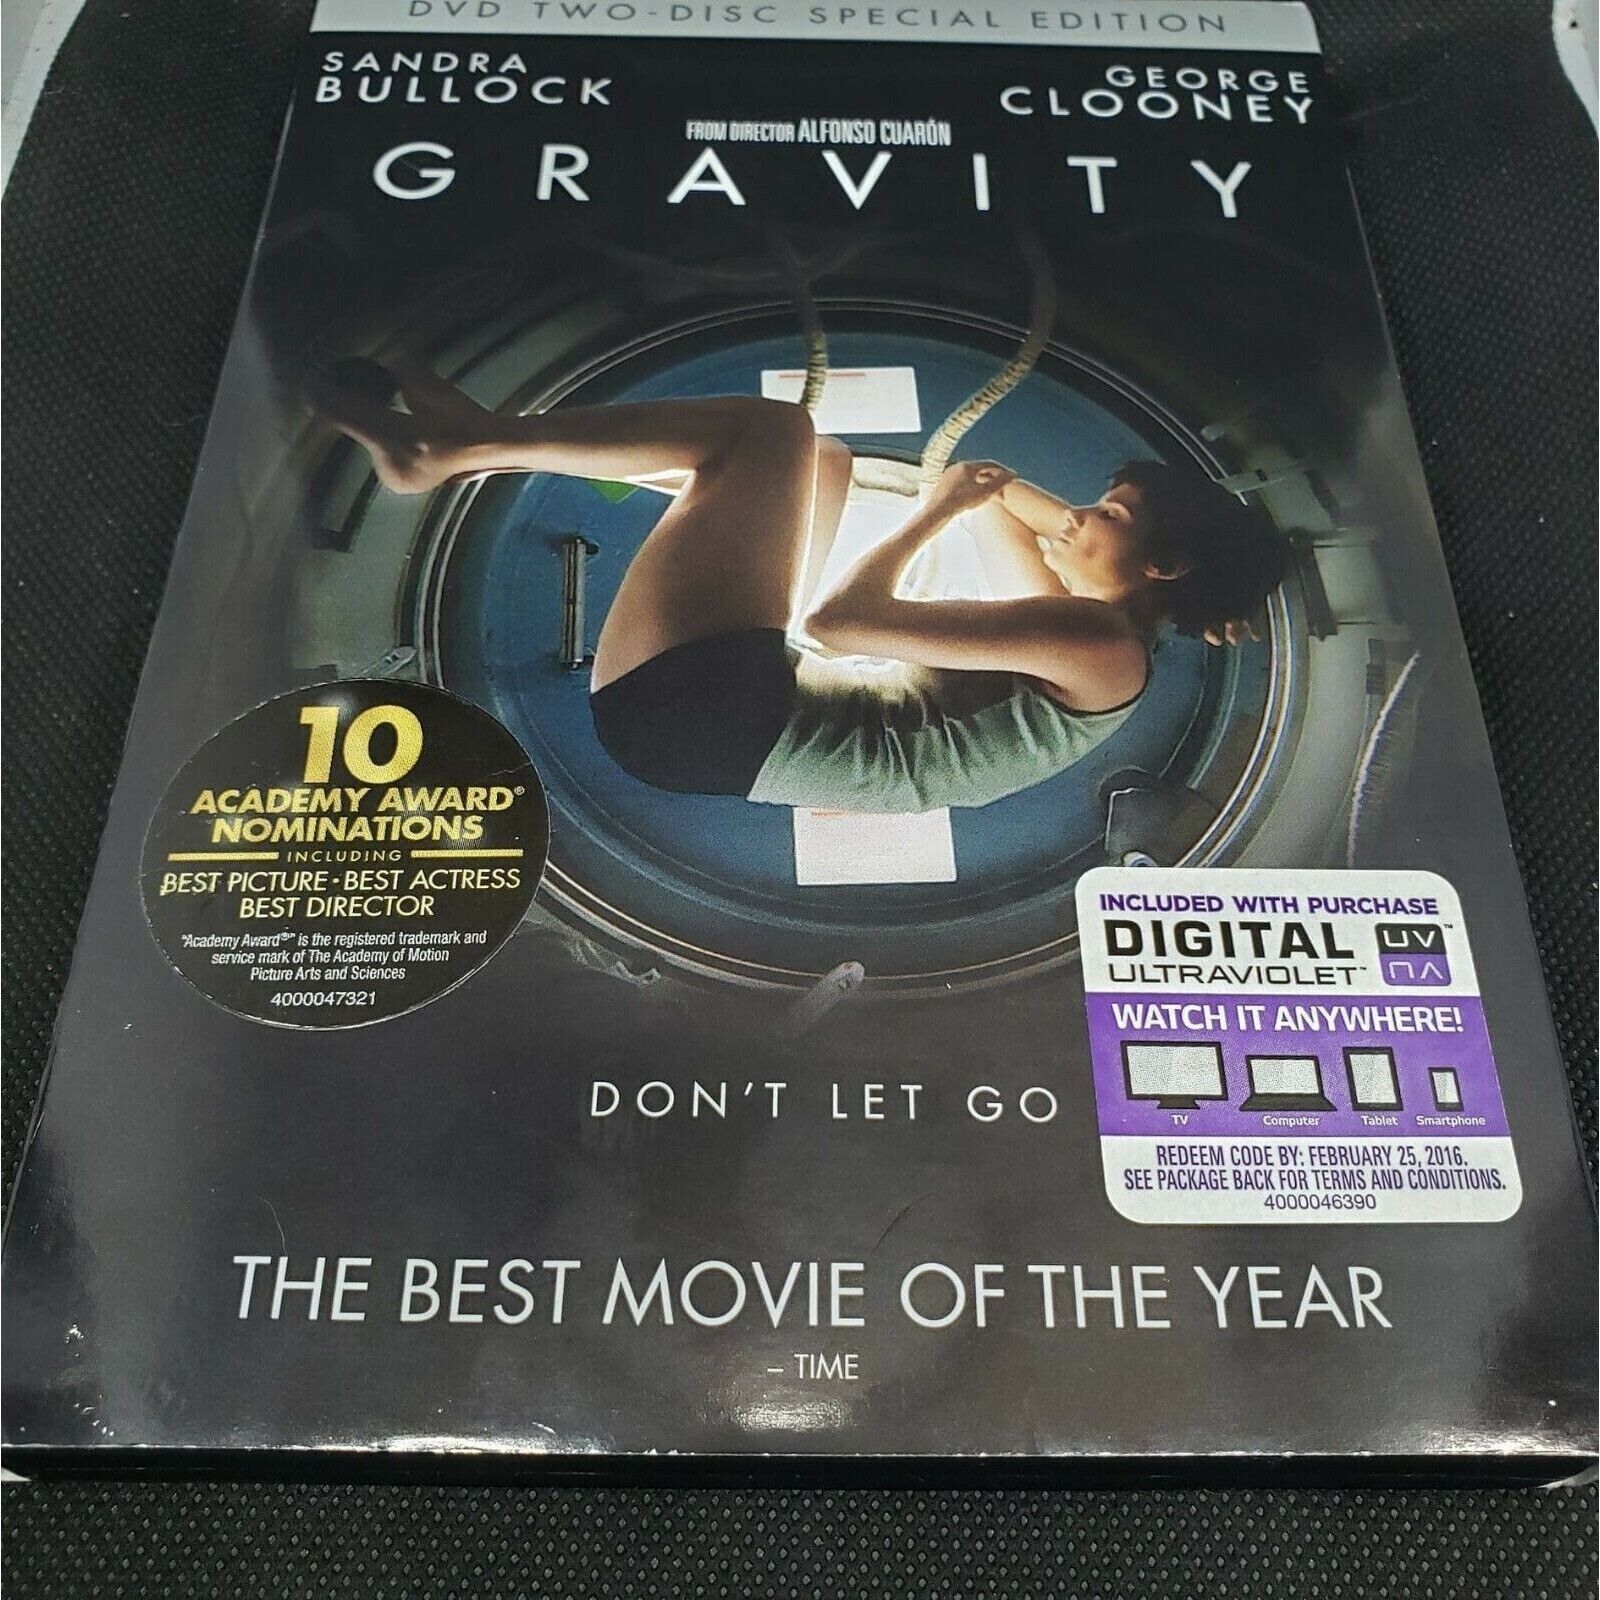 Primary image for Gravity - DVD, 2013, Special Edition - 2-Disc Set) Sandra Bullock, G. Clooney